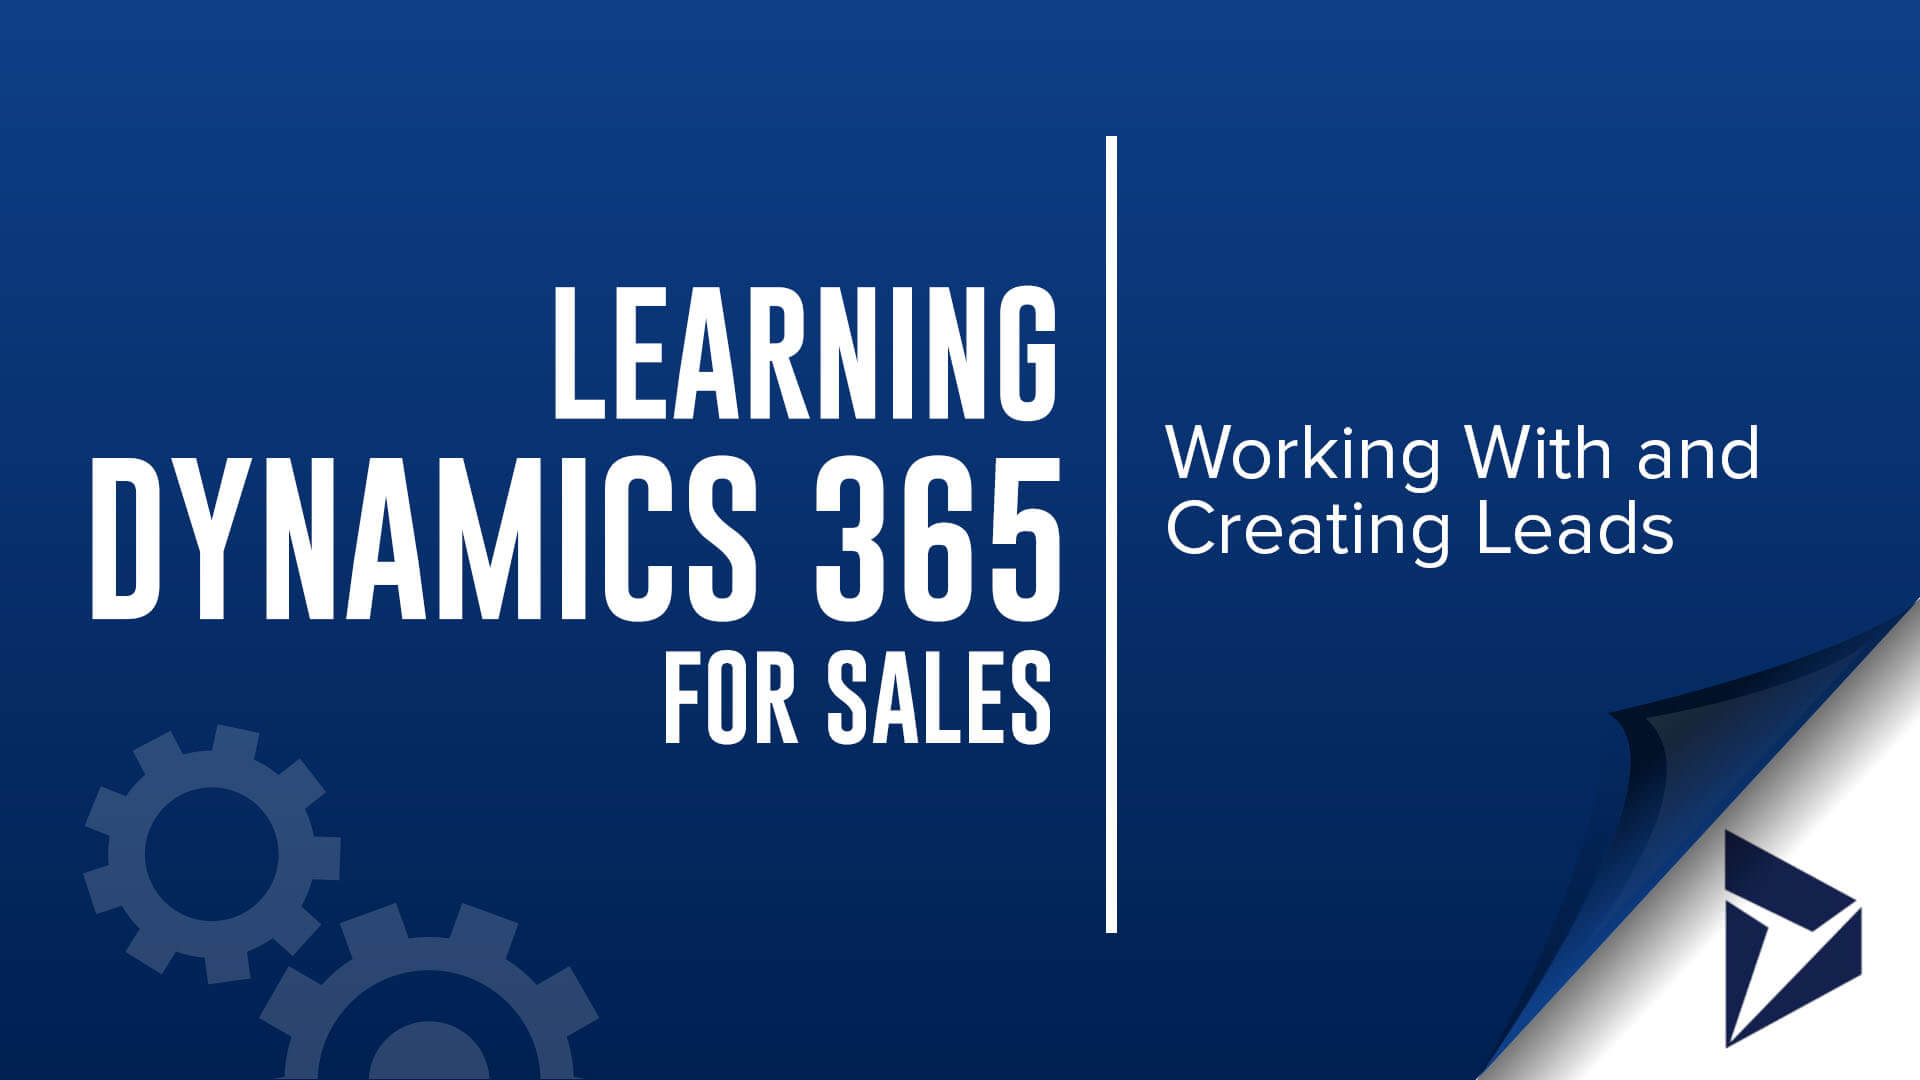 learning Dynamics 365 for Sales - working with and creating leads